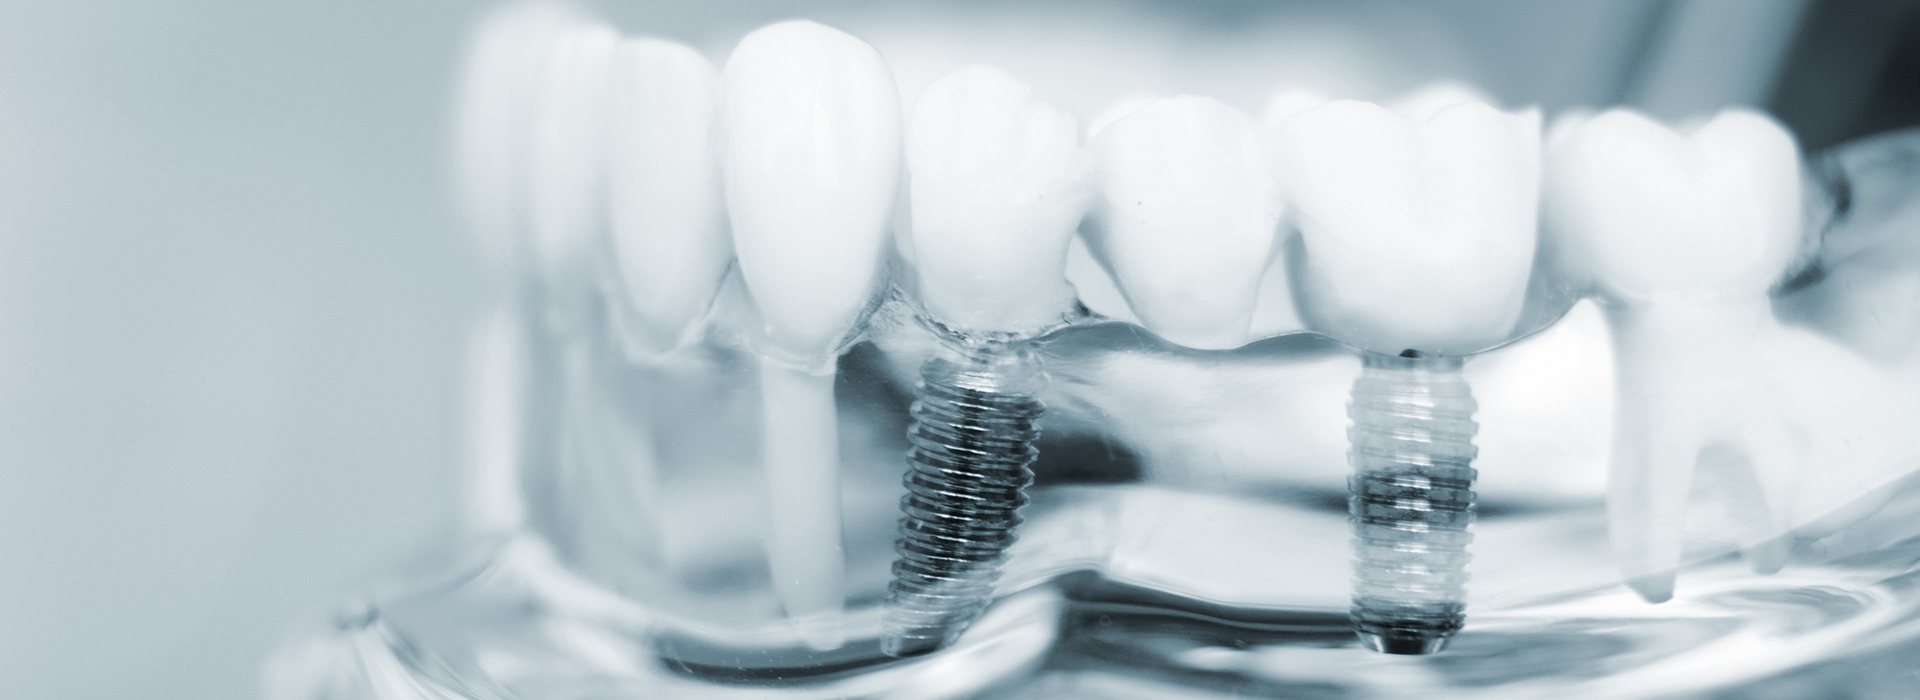 All About You Dental Group | Oral Cancer Screening, Cosmetic Dentistry and Root Canals